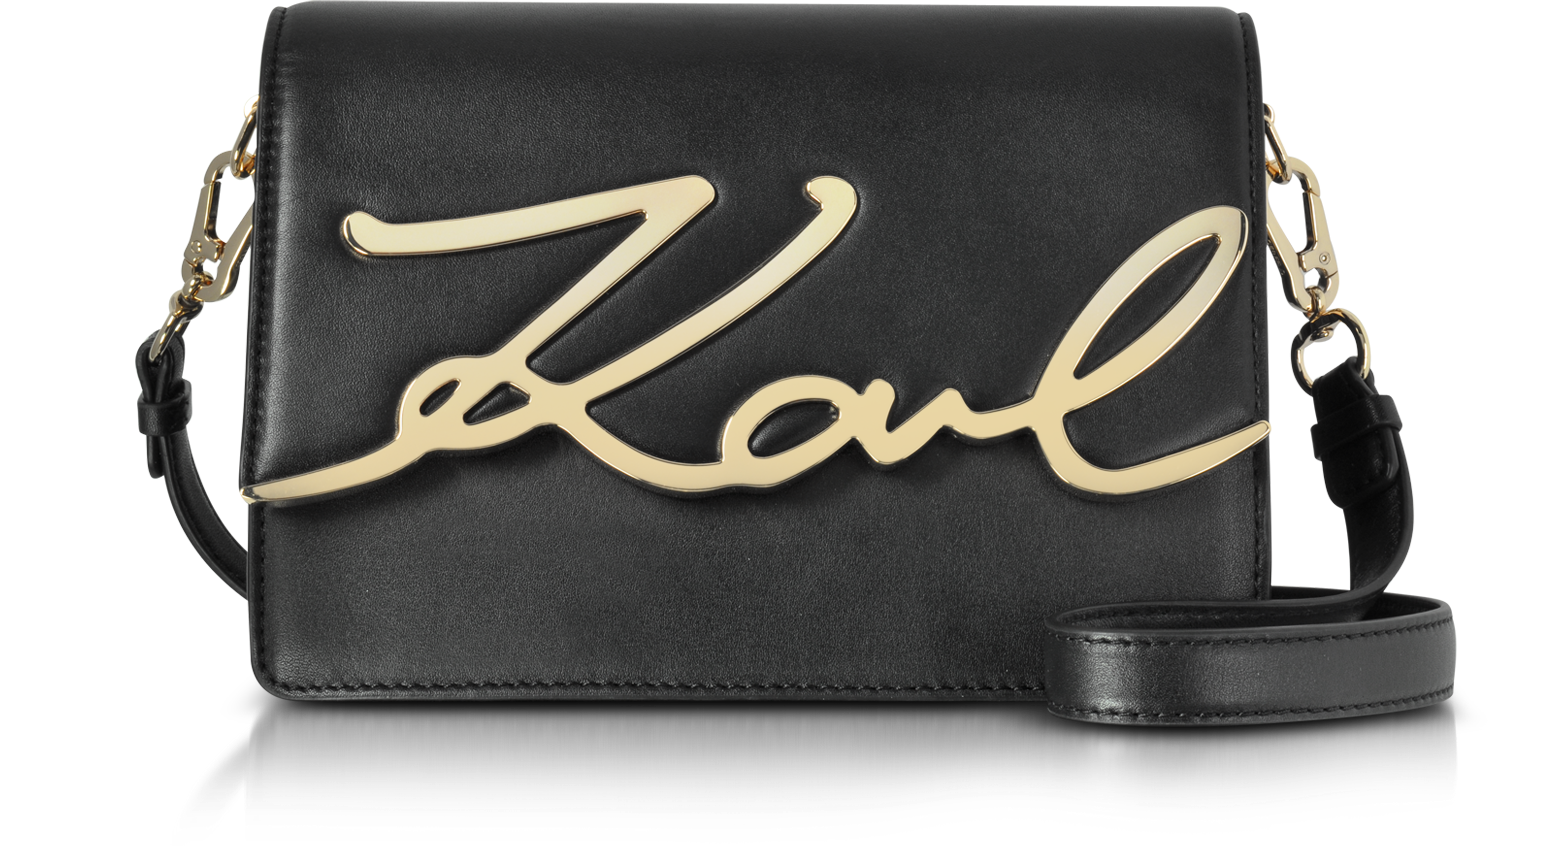 Karl Lagerfeld - Authenticated Clutch Bag - Leather Black Plain for Women, Very Good Condition